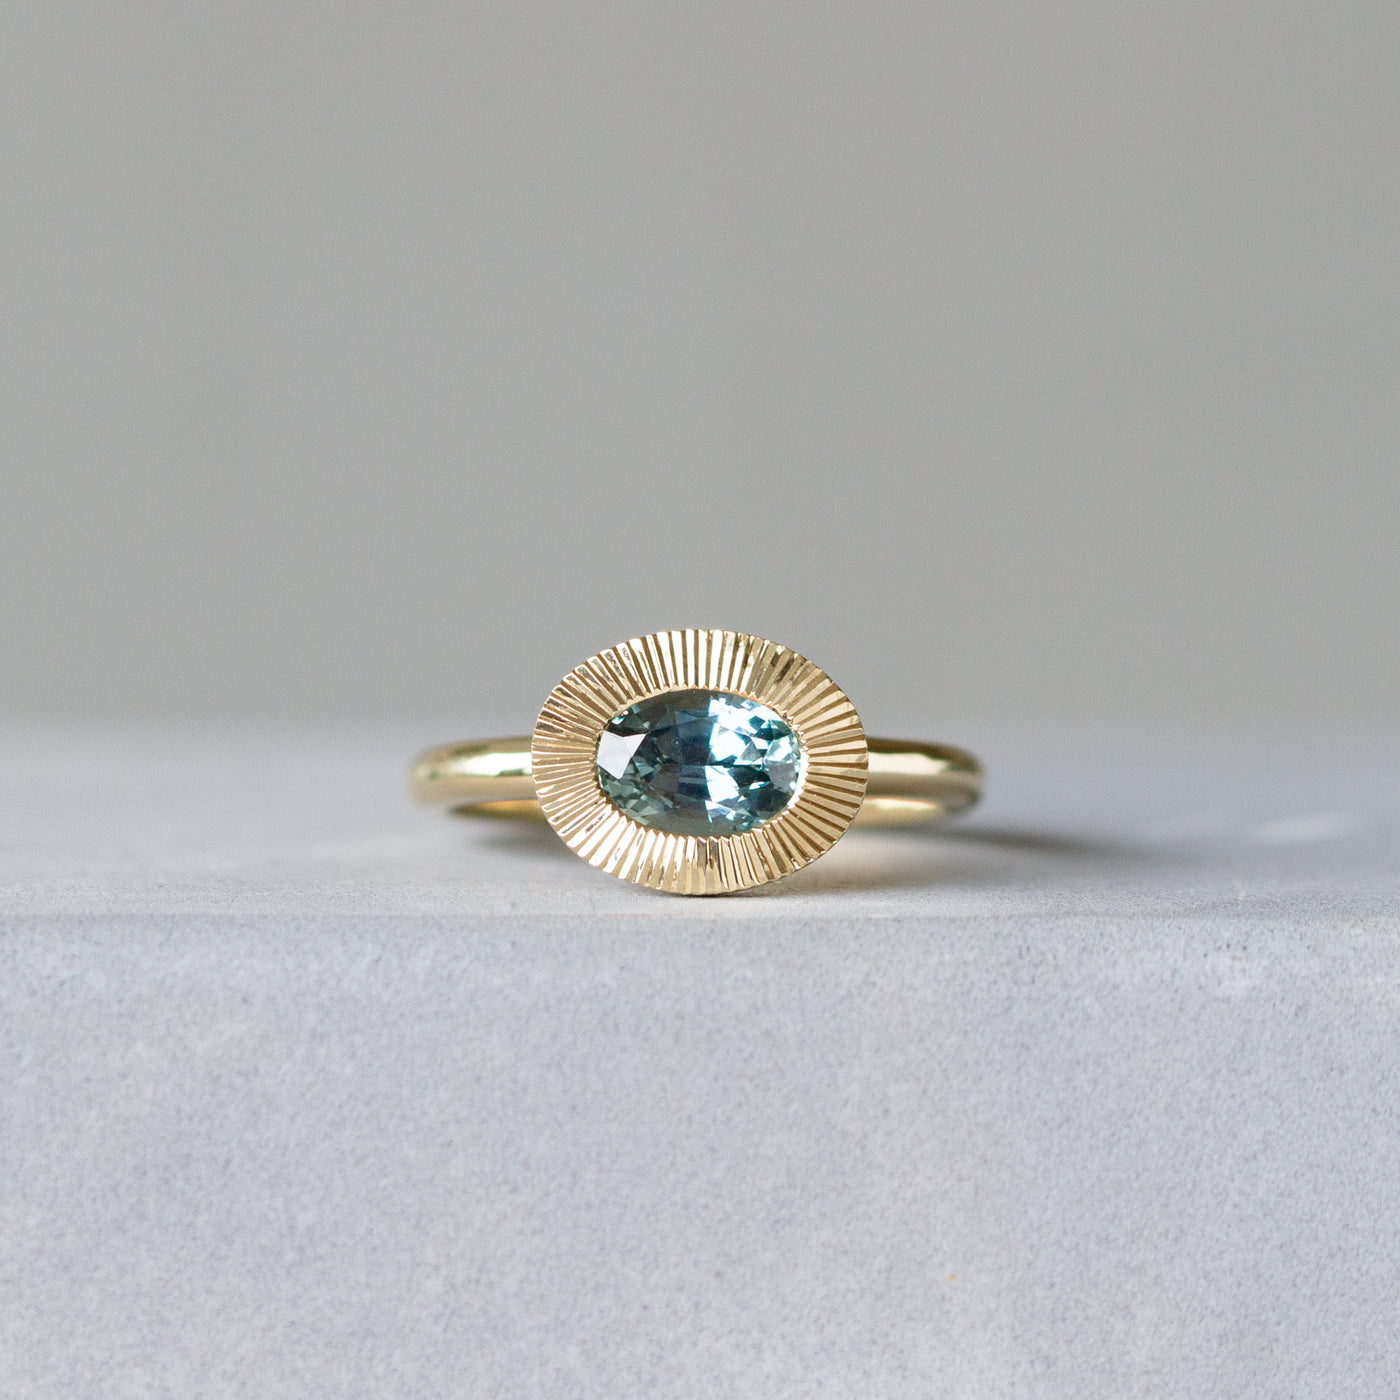 East-West Aurora Solitaire with Blue-Green Montana Sapphire